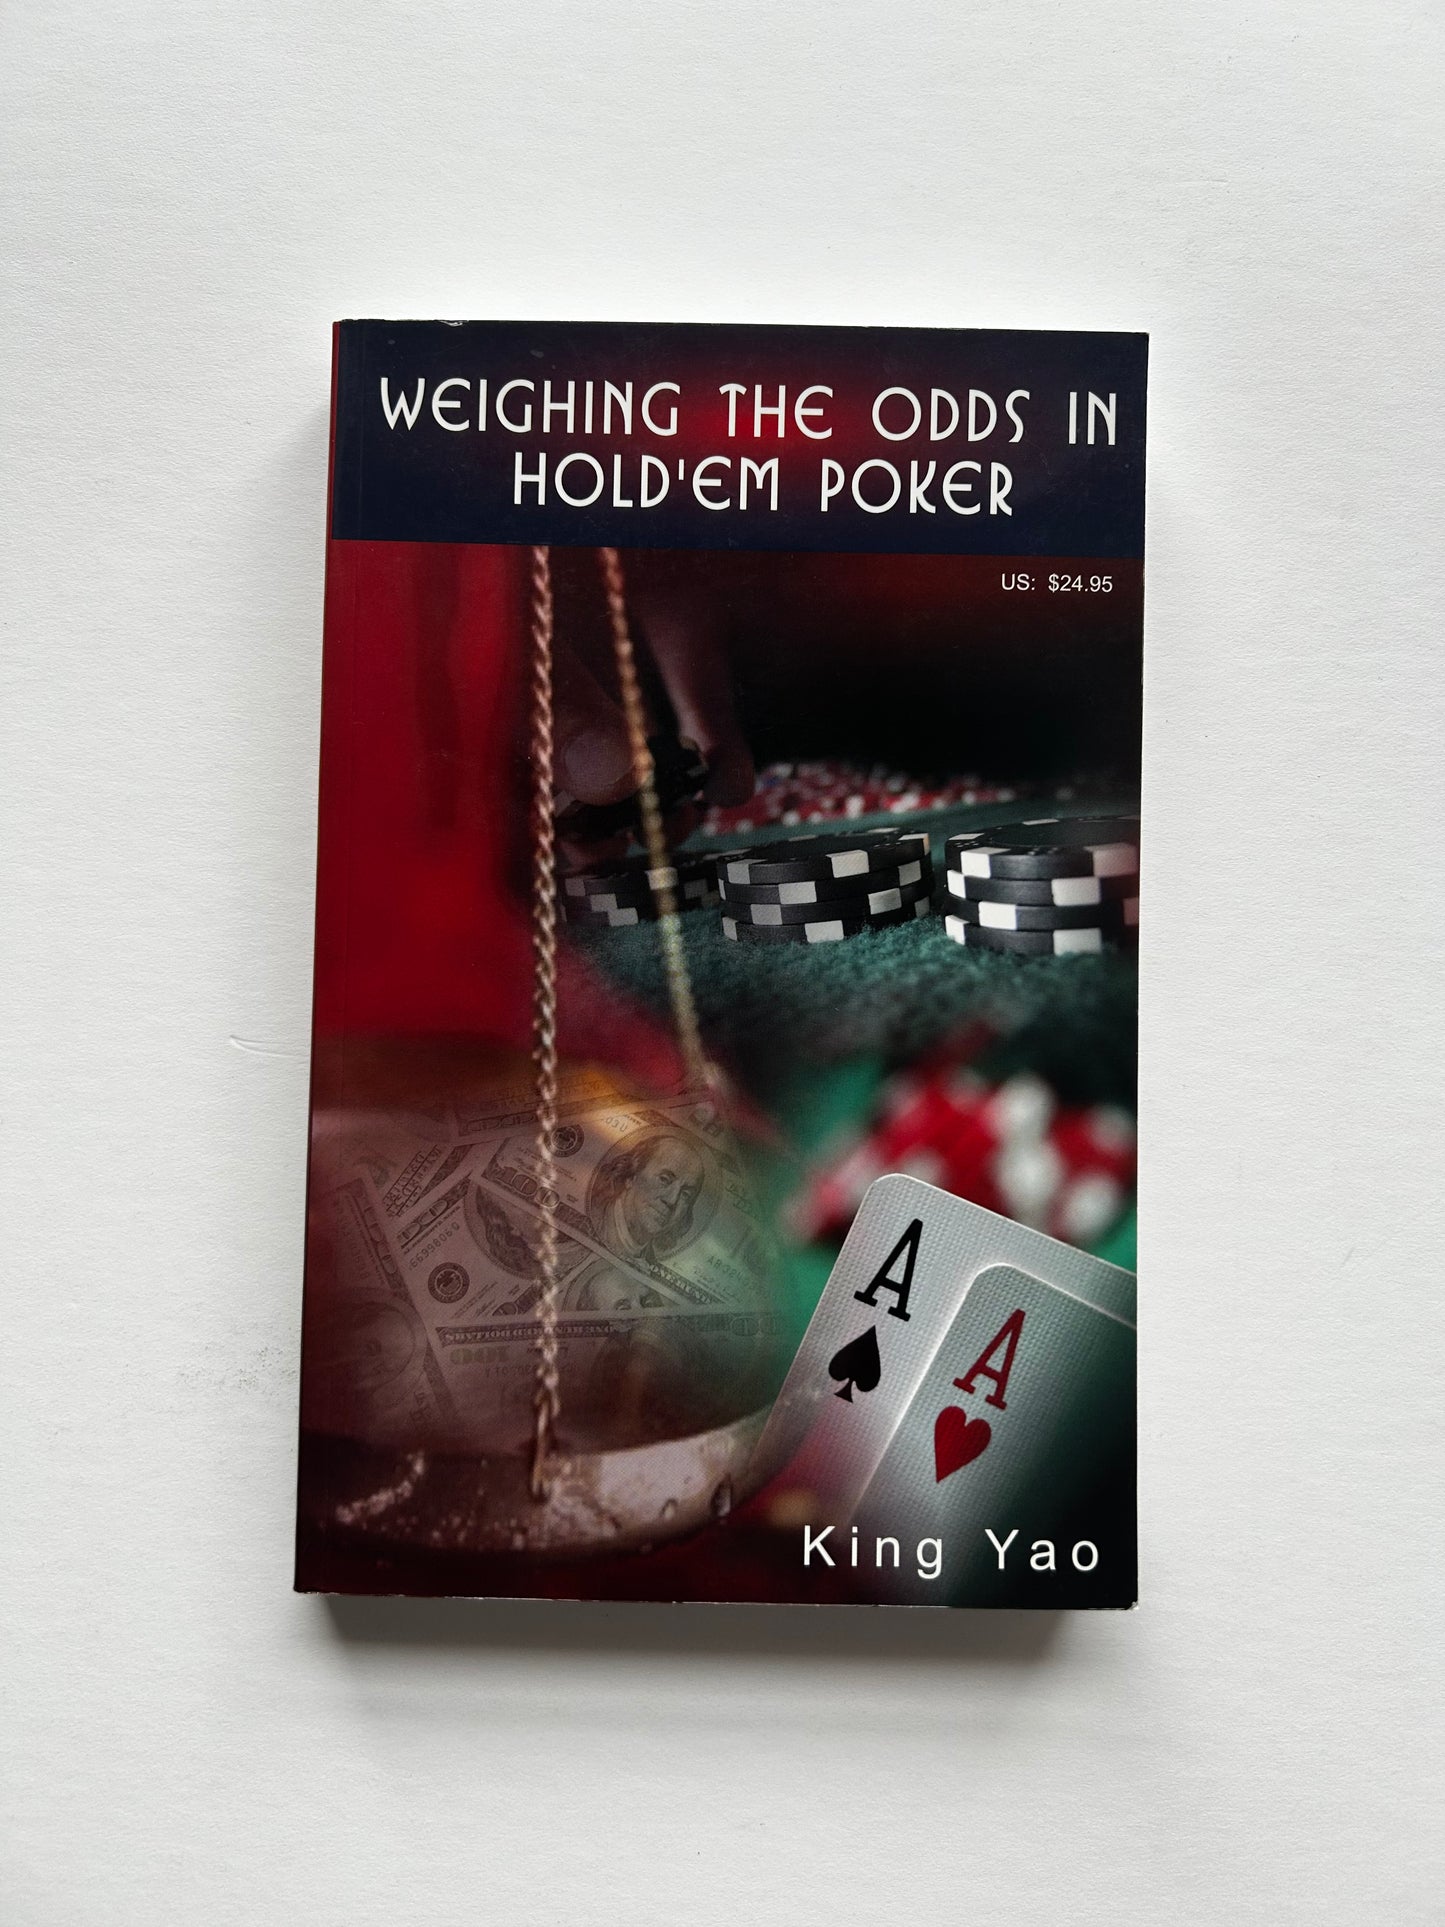 Weighing the odds in Hold'em poker